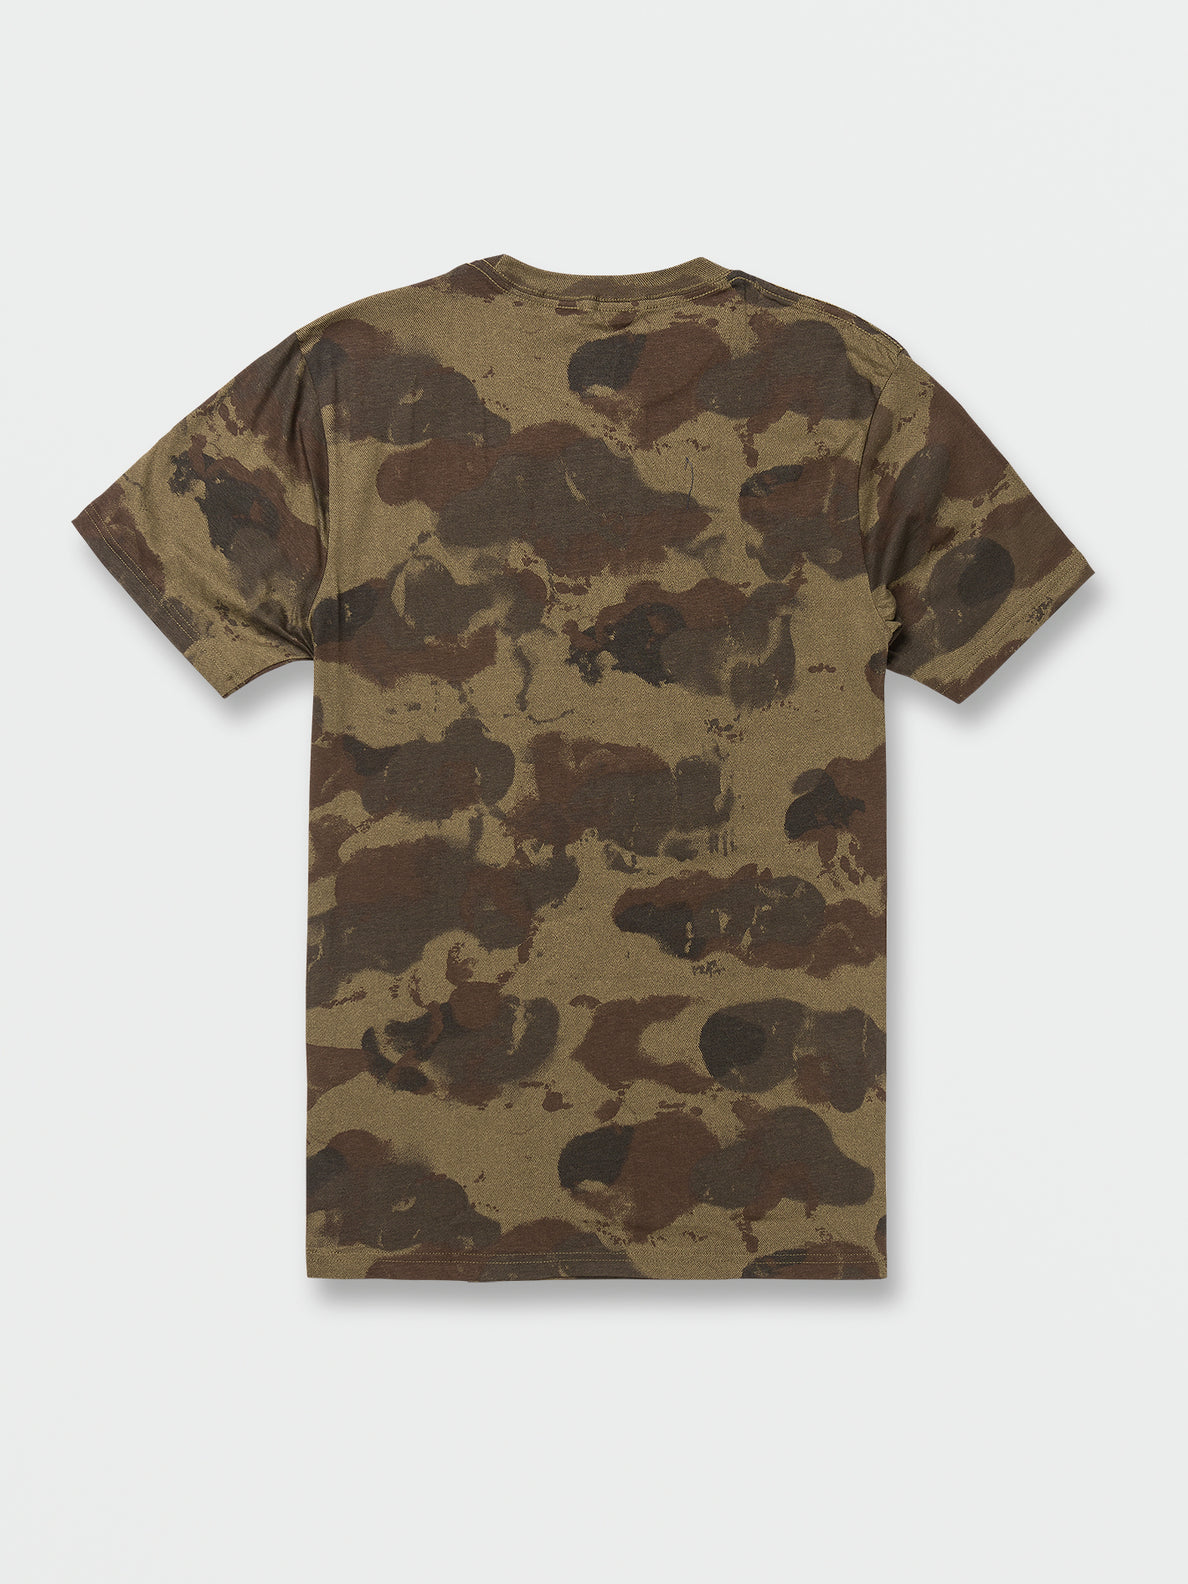 Parables Crew Tee - Camouflage